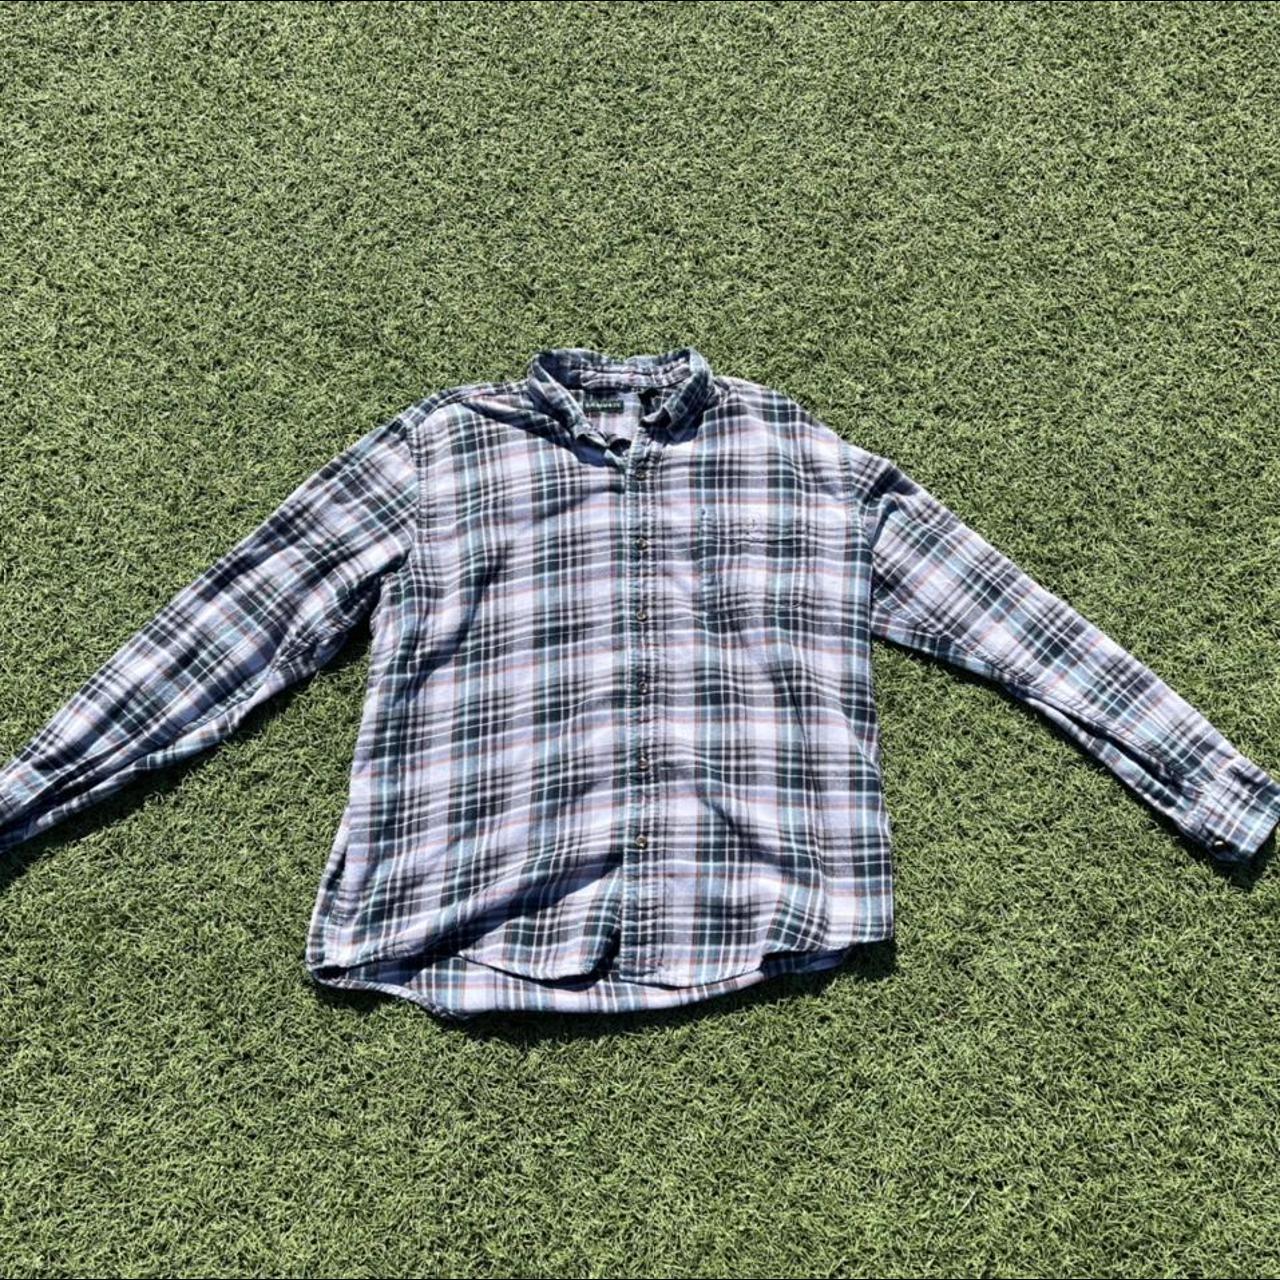 Product Image 1 - G.H. Bass - Flannel 👕

Size